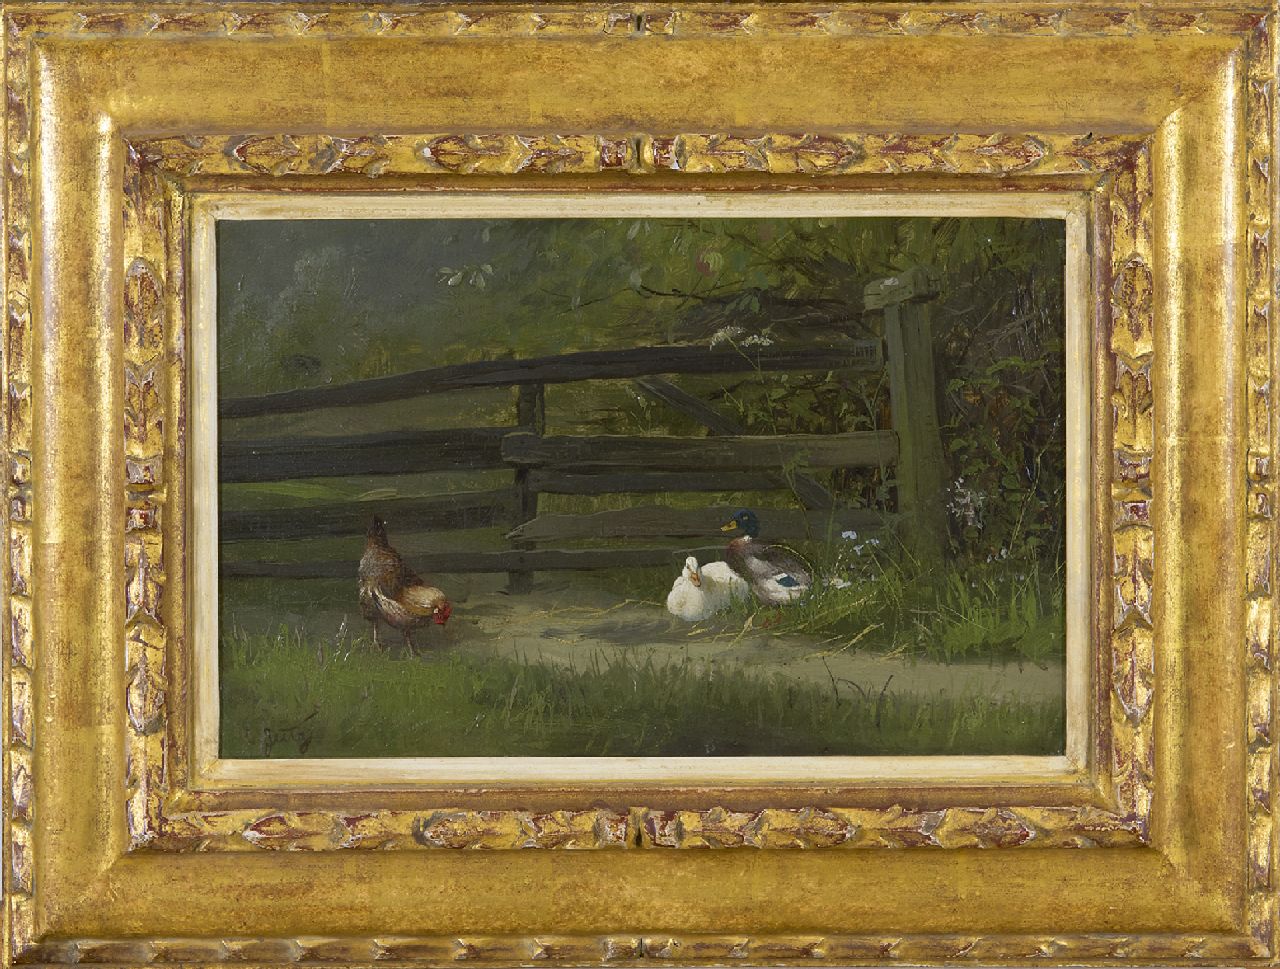 Jutz C.  | Carl Jutz | Paintings offered for sale | A chicken and ducks near a garden fence, oil on paper laid down on panel 21.6 x 32.1 cm, signed l.l.